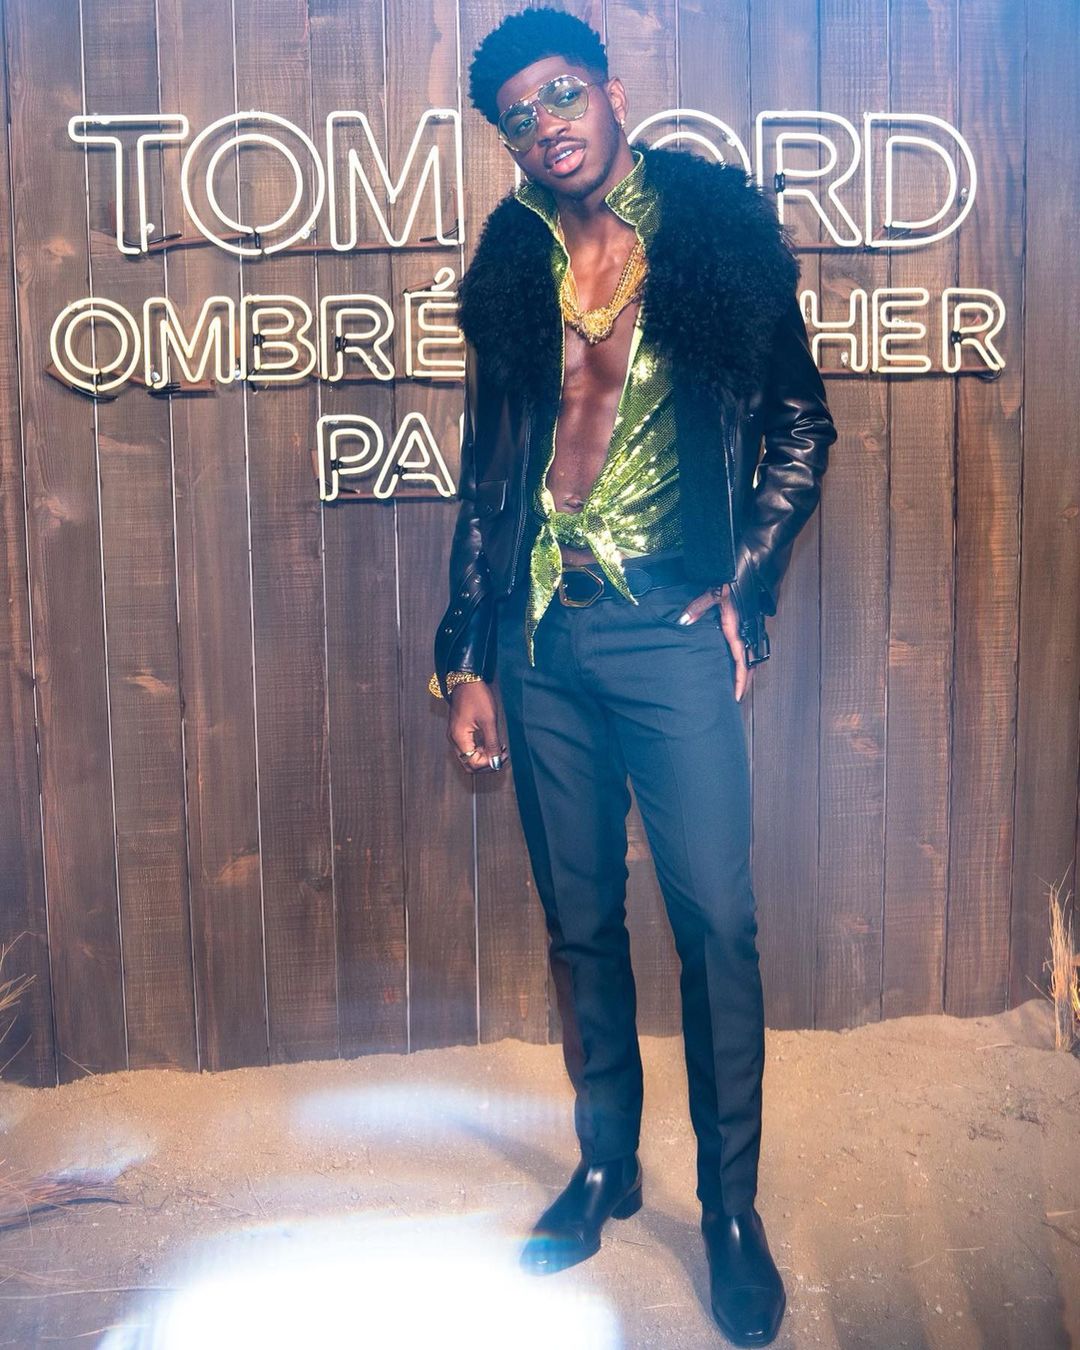 Lil Nas X and a Mechanical Bull Mark Tom Ford Ombré Leather Launch